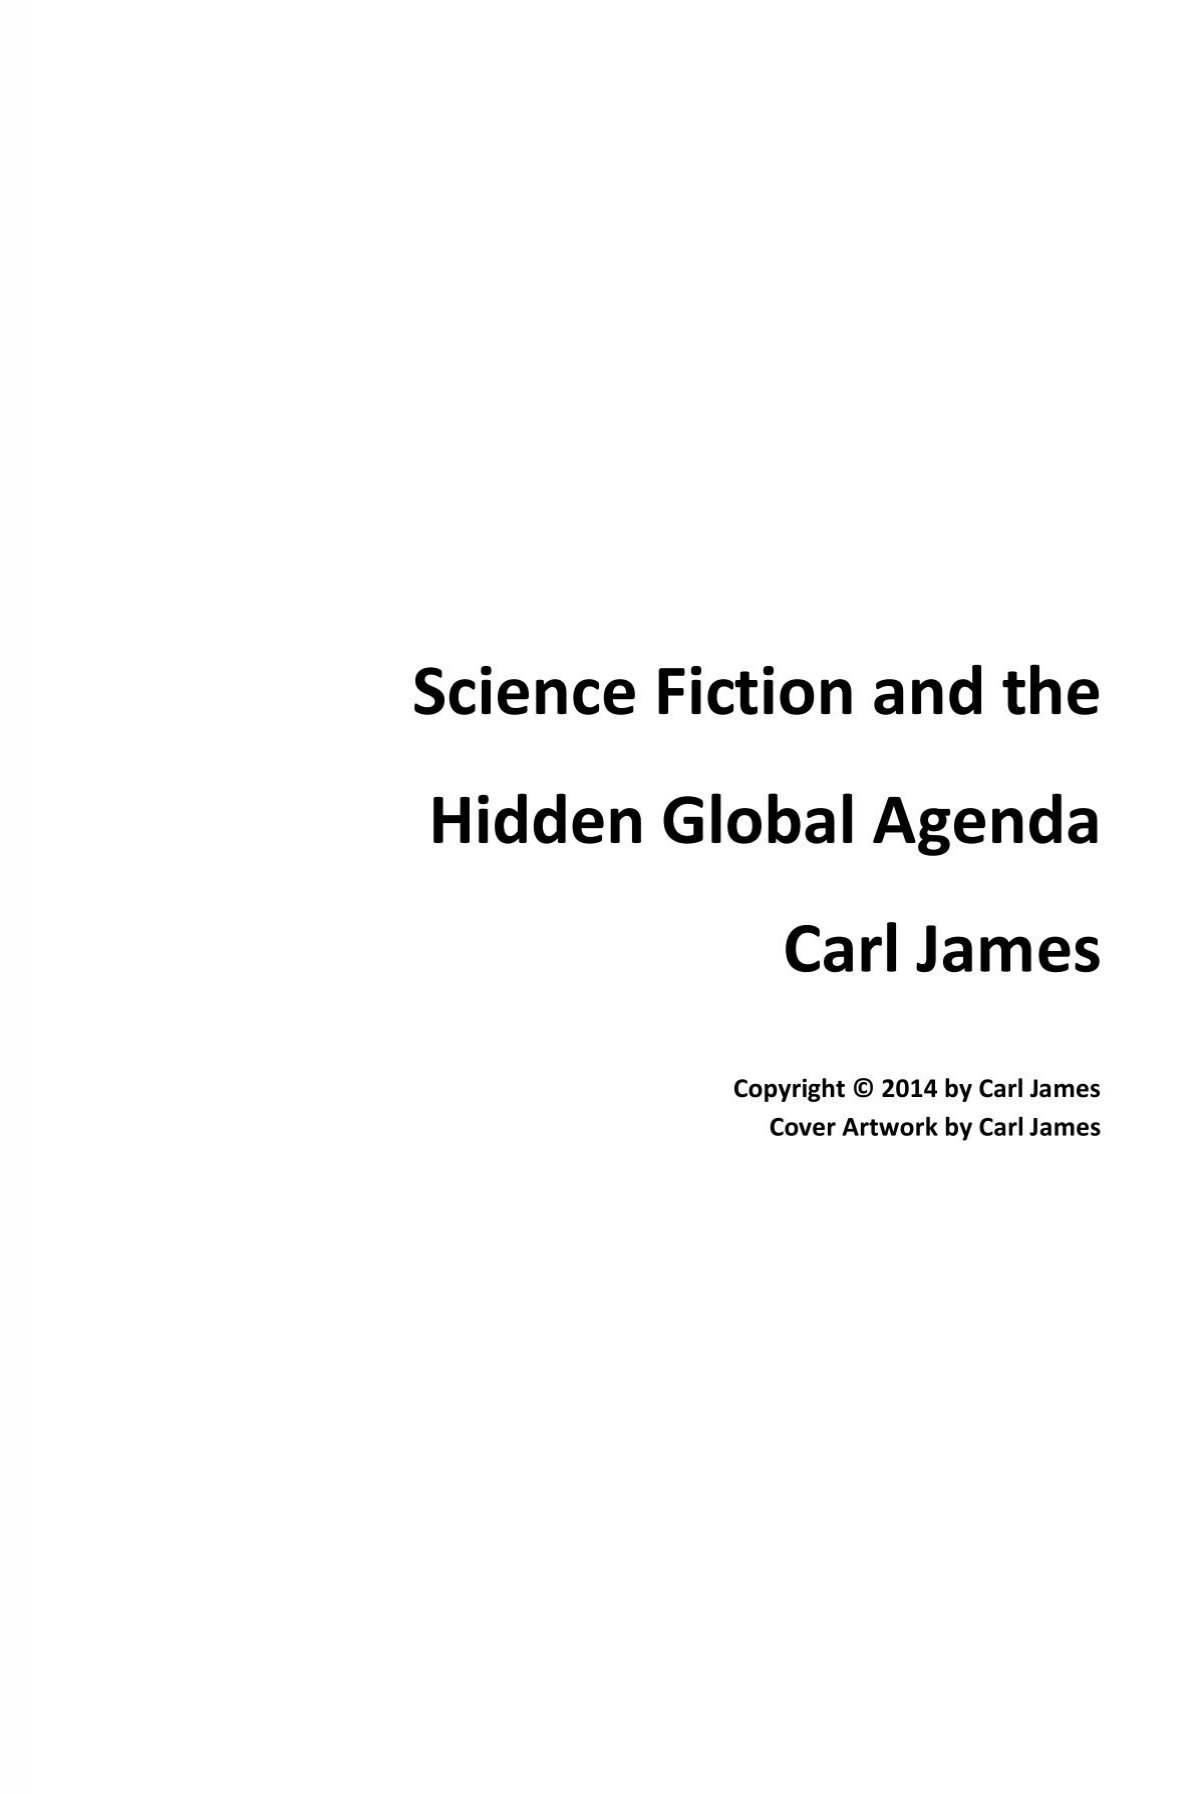 Science Fiction and the Hidden Global Agenda - Carl James - 1st Ed